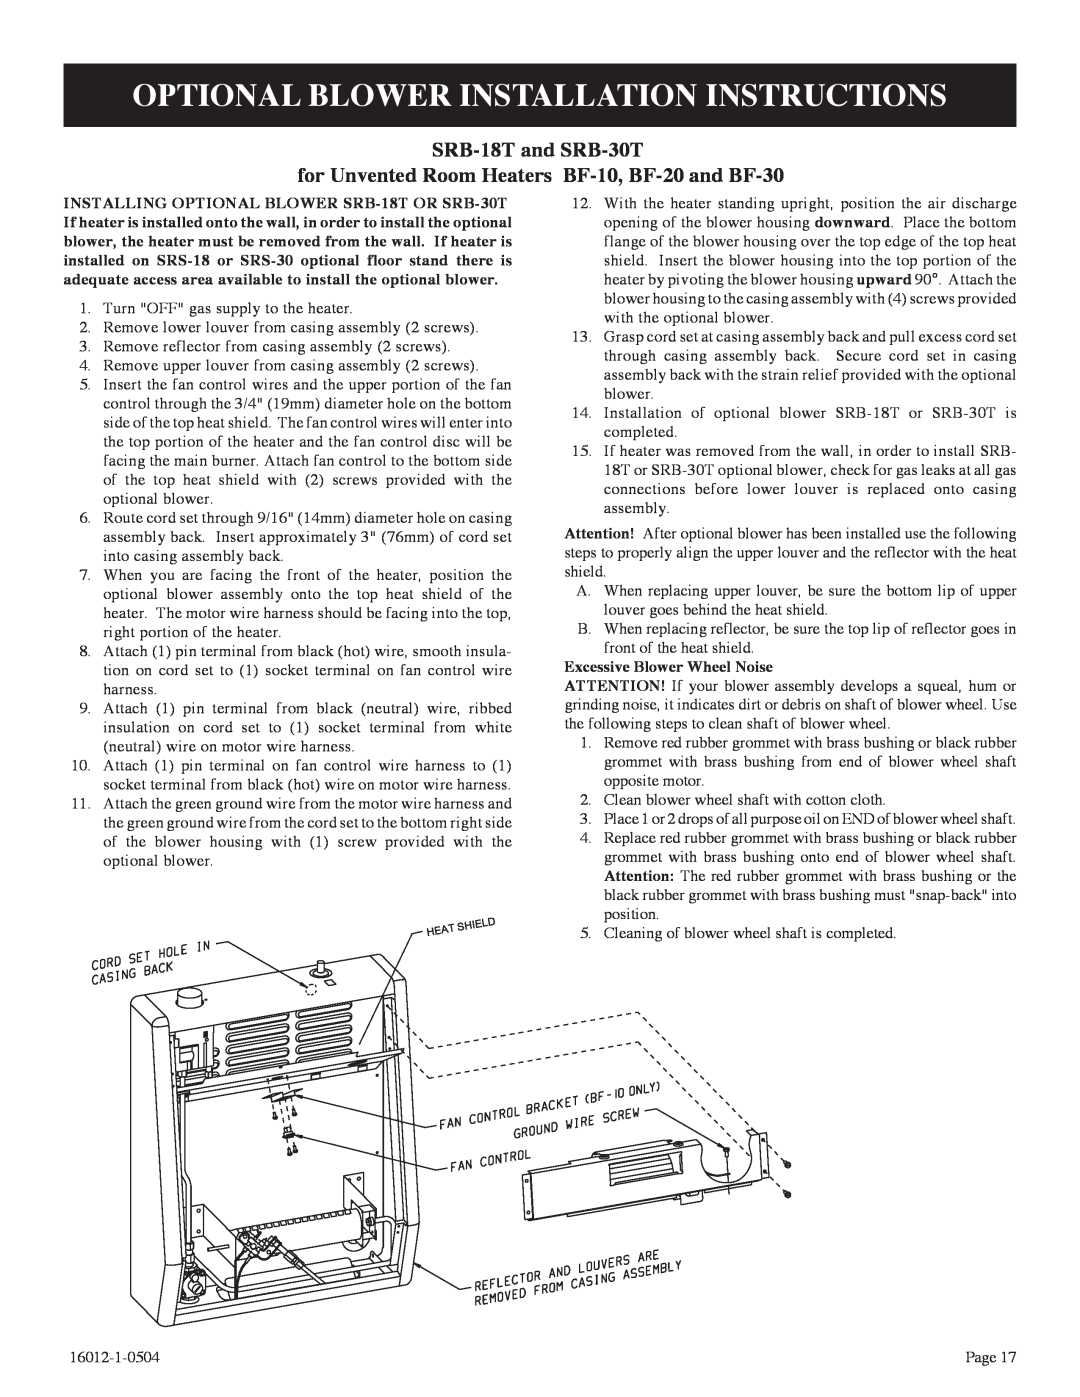 Empire Products BF-10-2 Optional Blower Installation Instructions, SRB-18Tand SRB-30T, Excessive Blower Wheel Noise 